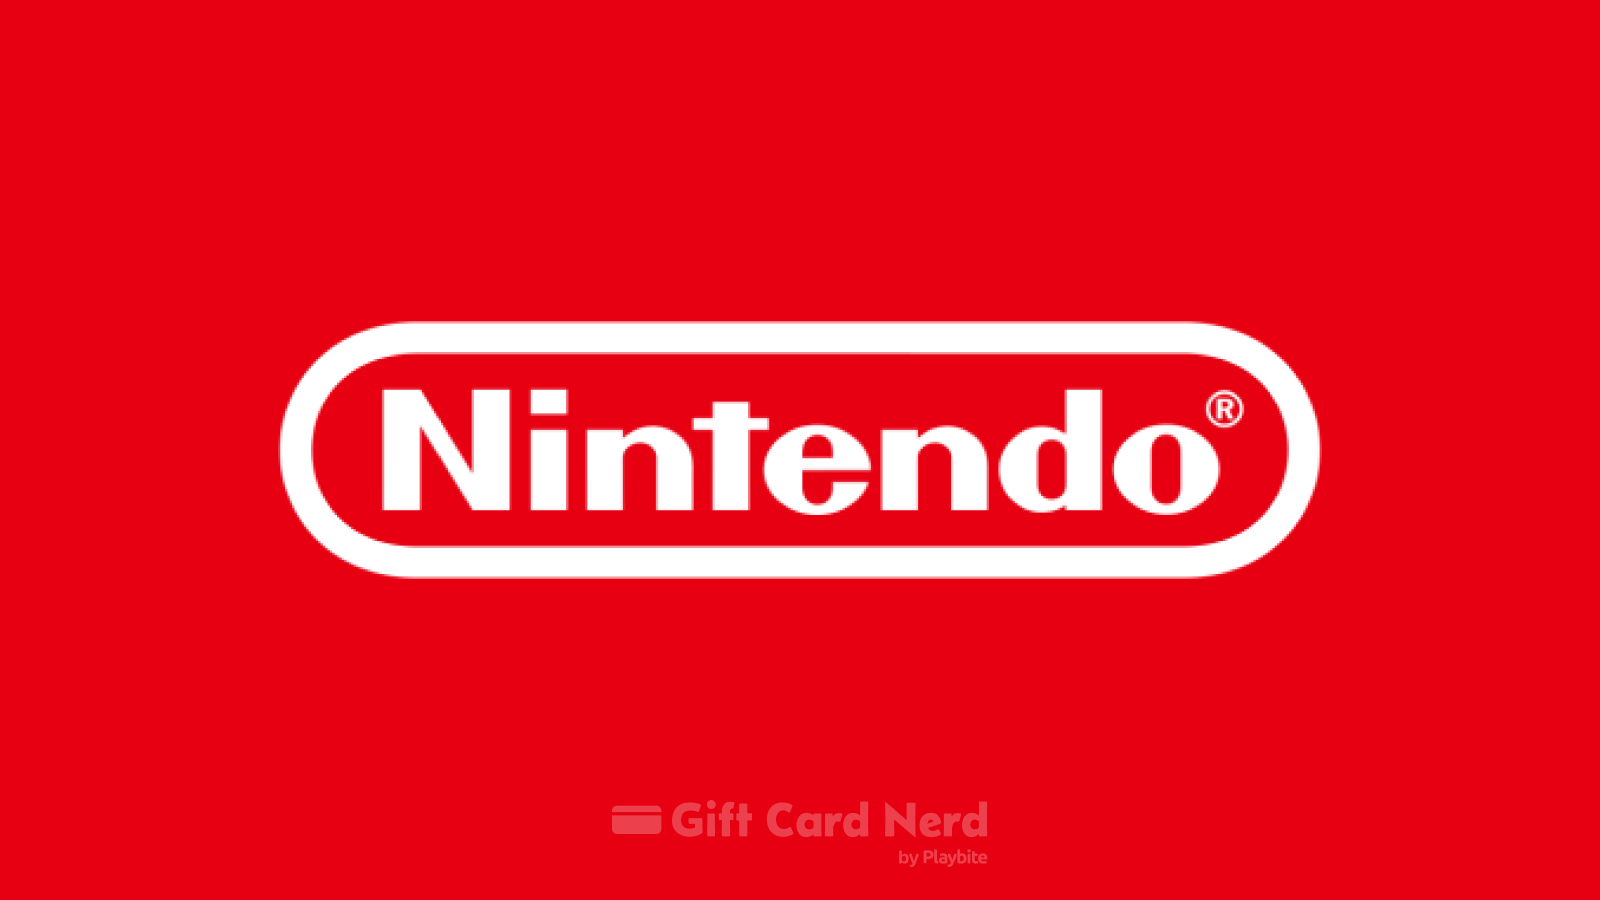 Does Amazon Sell Nintendo Gift Cards?